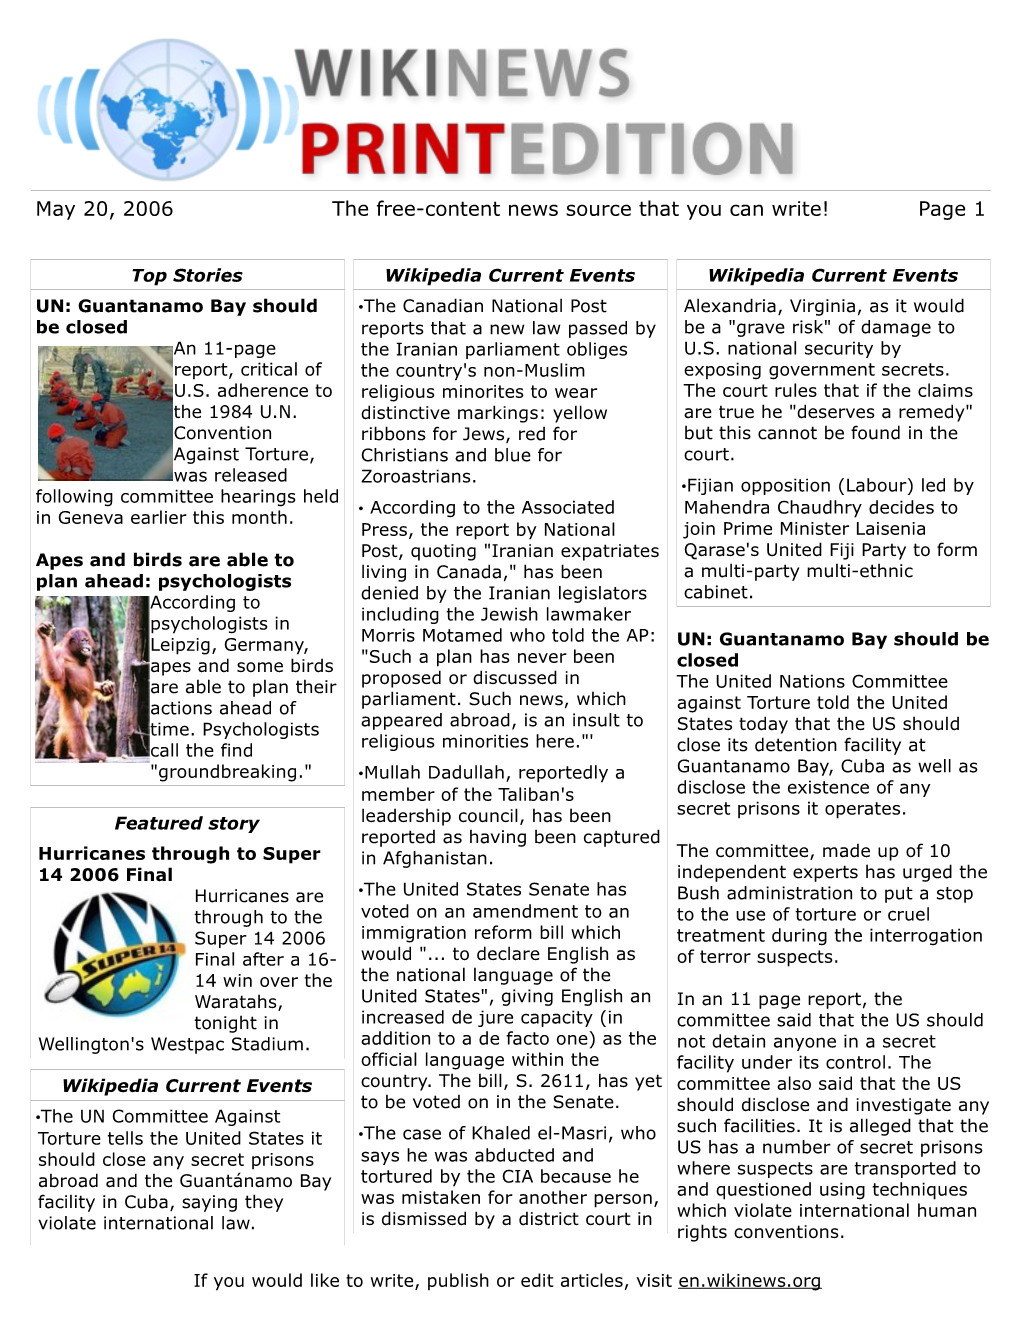 May 20, 2006 the Free-Content News Source That You Can Write! Page 1